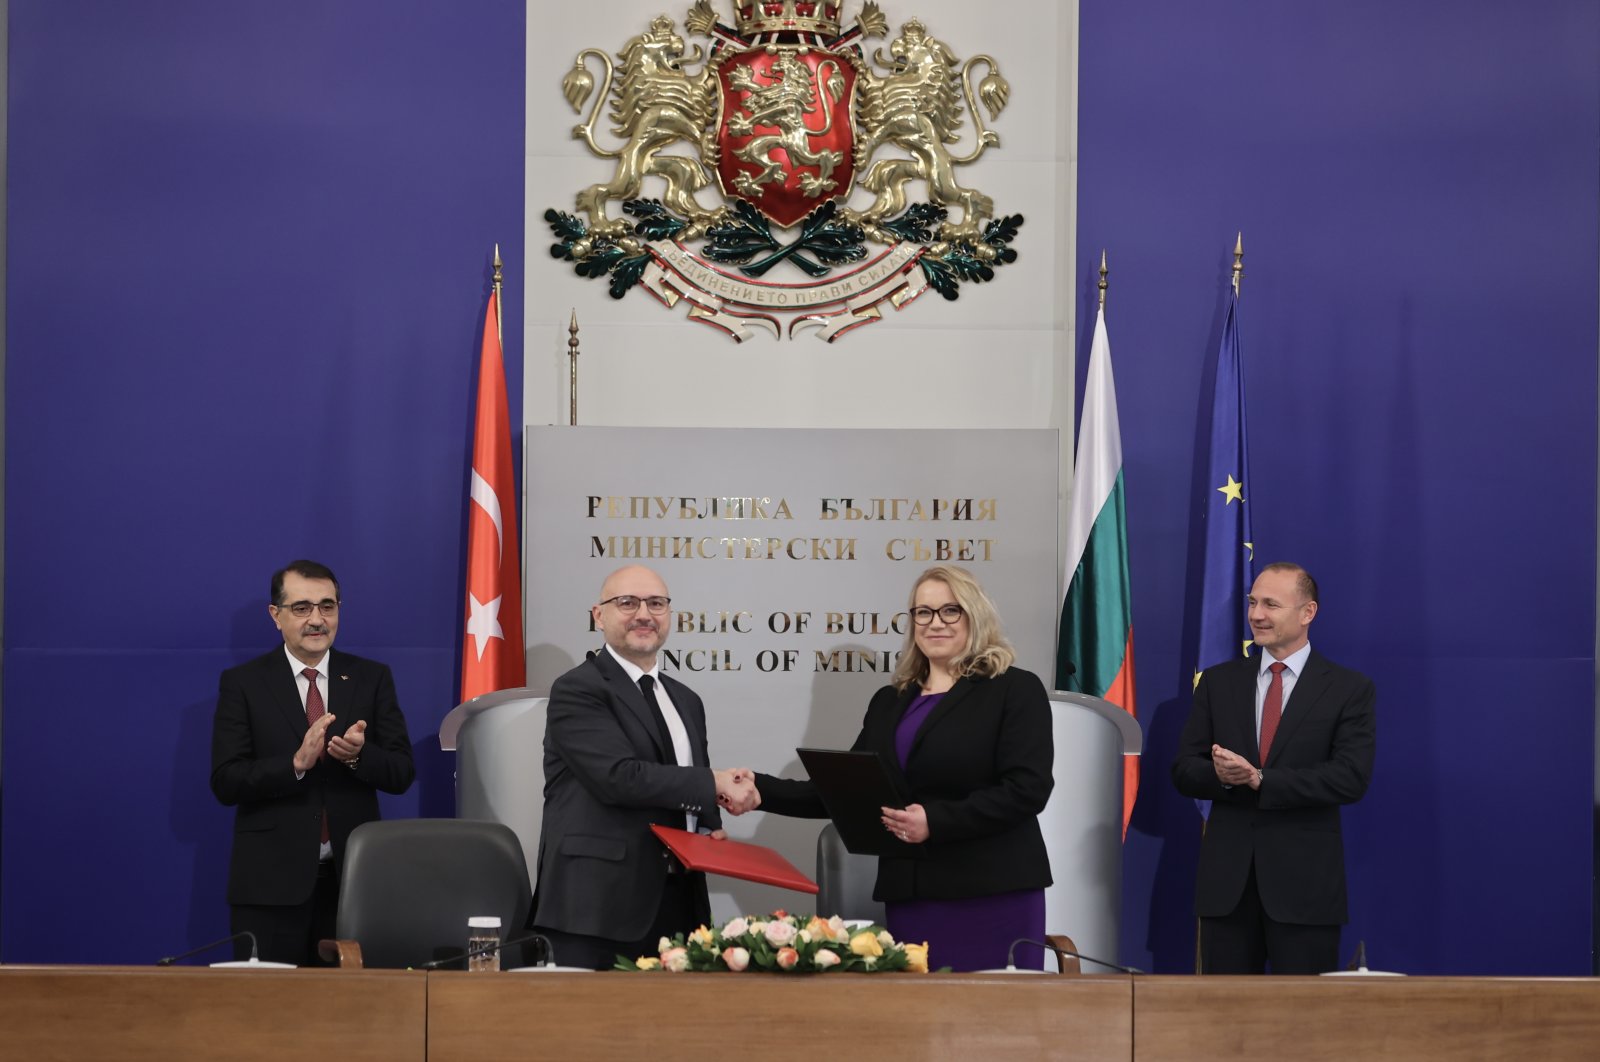 Türkiye&#039;s Energy and Natural Resources Minister Fatih Dönmez (L) and his Bulgarian counterpart Rossen Hristov (R) are seen during a signing ceremony for a long-term natural gas agreement, in Sofia, Bulgaria, Jan. 3, 2022.